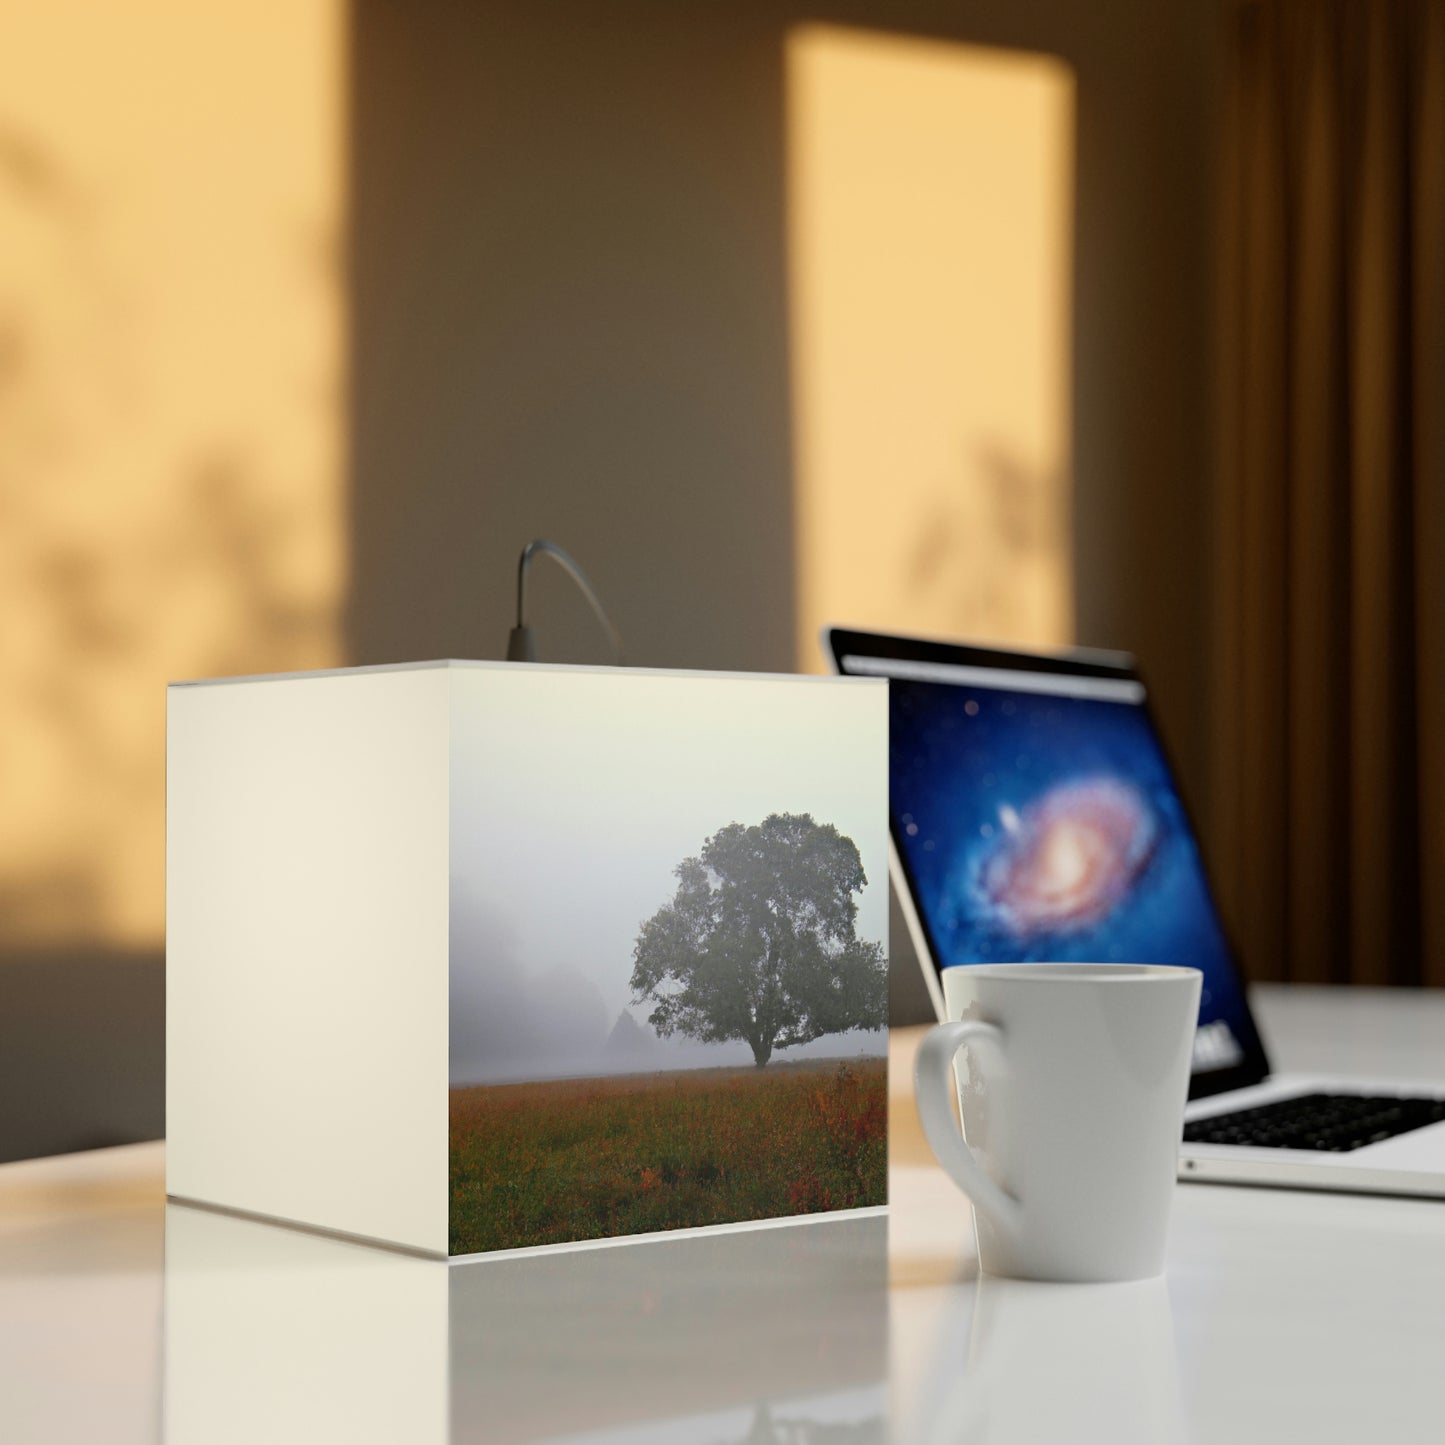 The Lonely Tree in the Foggy Meadow - The Alien Light Cube Lamp